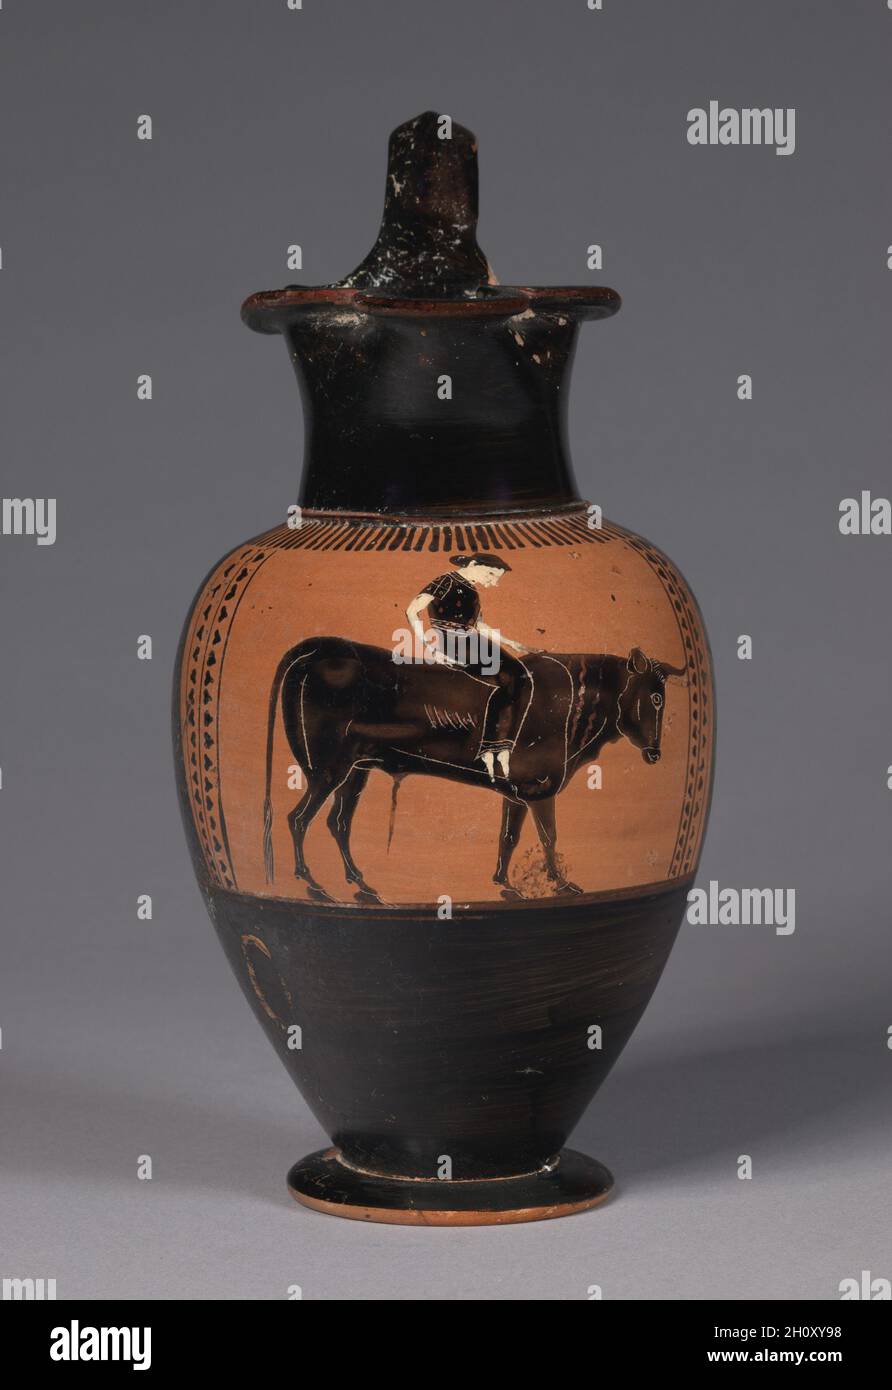 Black-Figure Trefoil Oinochoe (Wine Jug): Europa on Bull, c. 530 BC. Attributed to Class of Vatican 440 (Greek, Attic). Ceramic; overall: 23.6 cm (9 5/16 in.).  Zeus, in the form of a bull, abducts Europa. Stock Photo